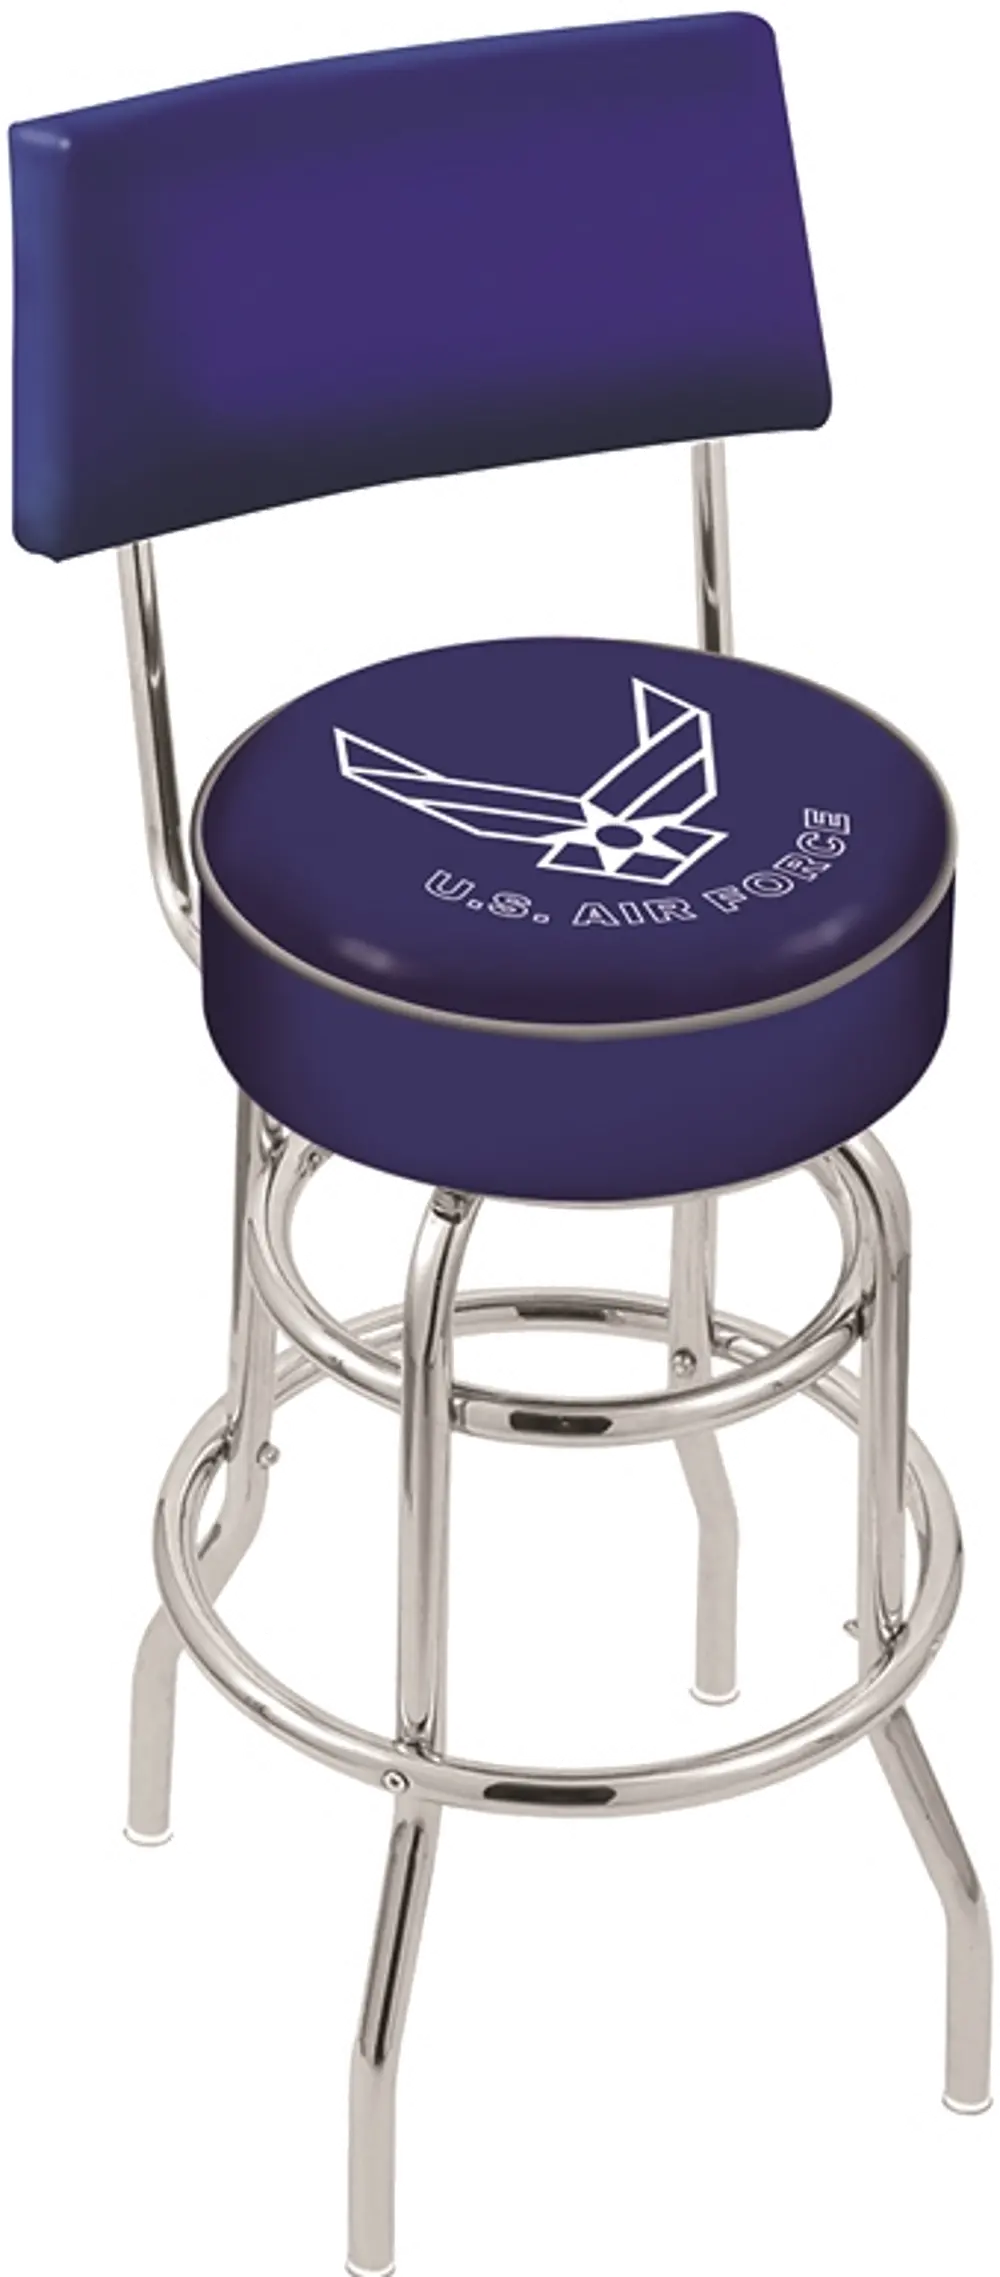 Chrome Swivel Counter Height Stool with Back Rest - US Air Force-1